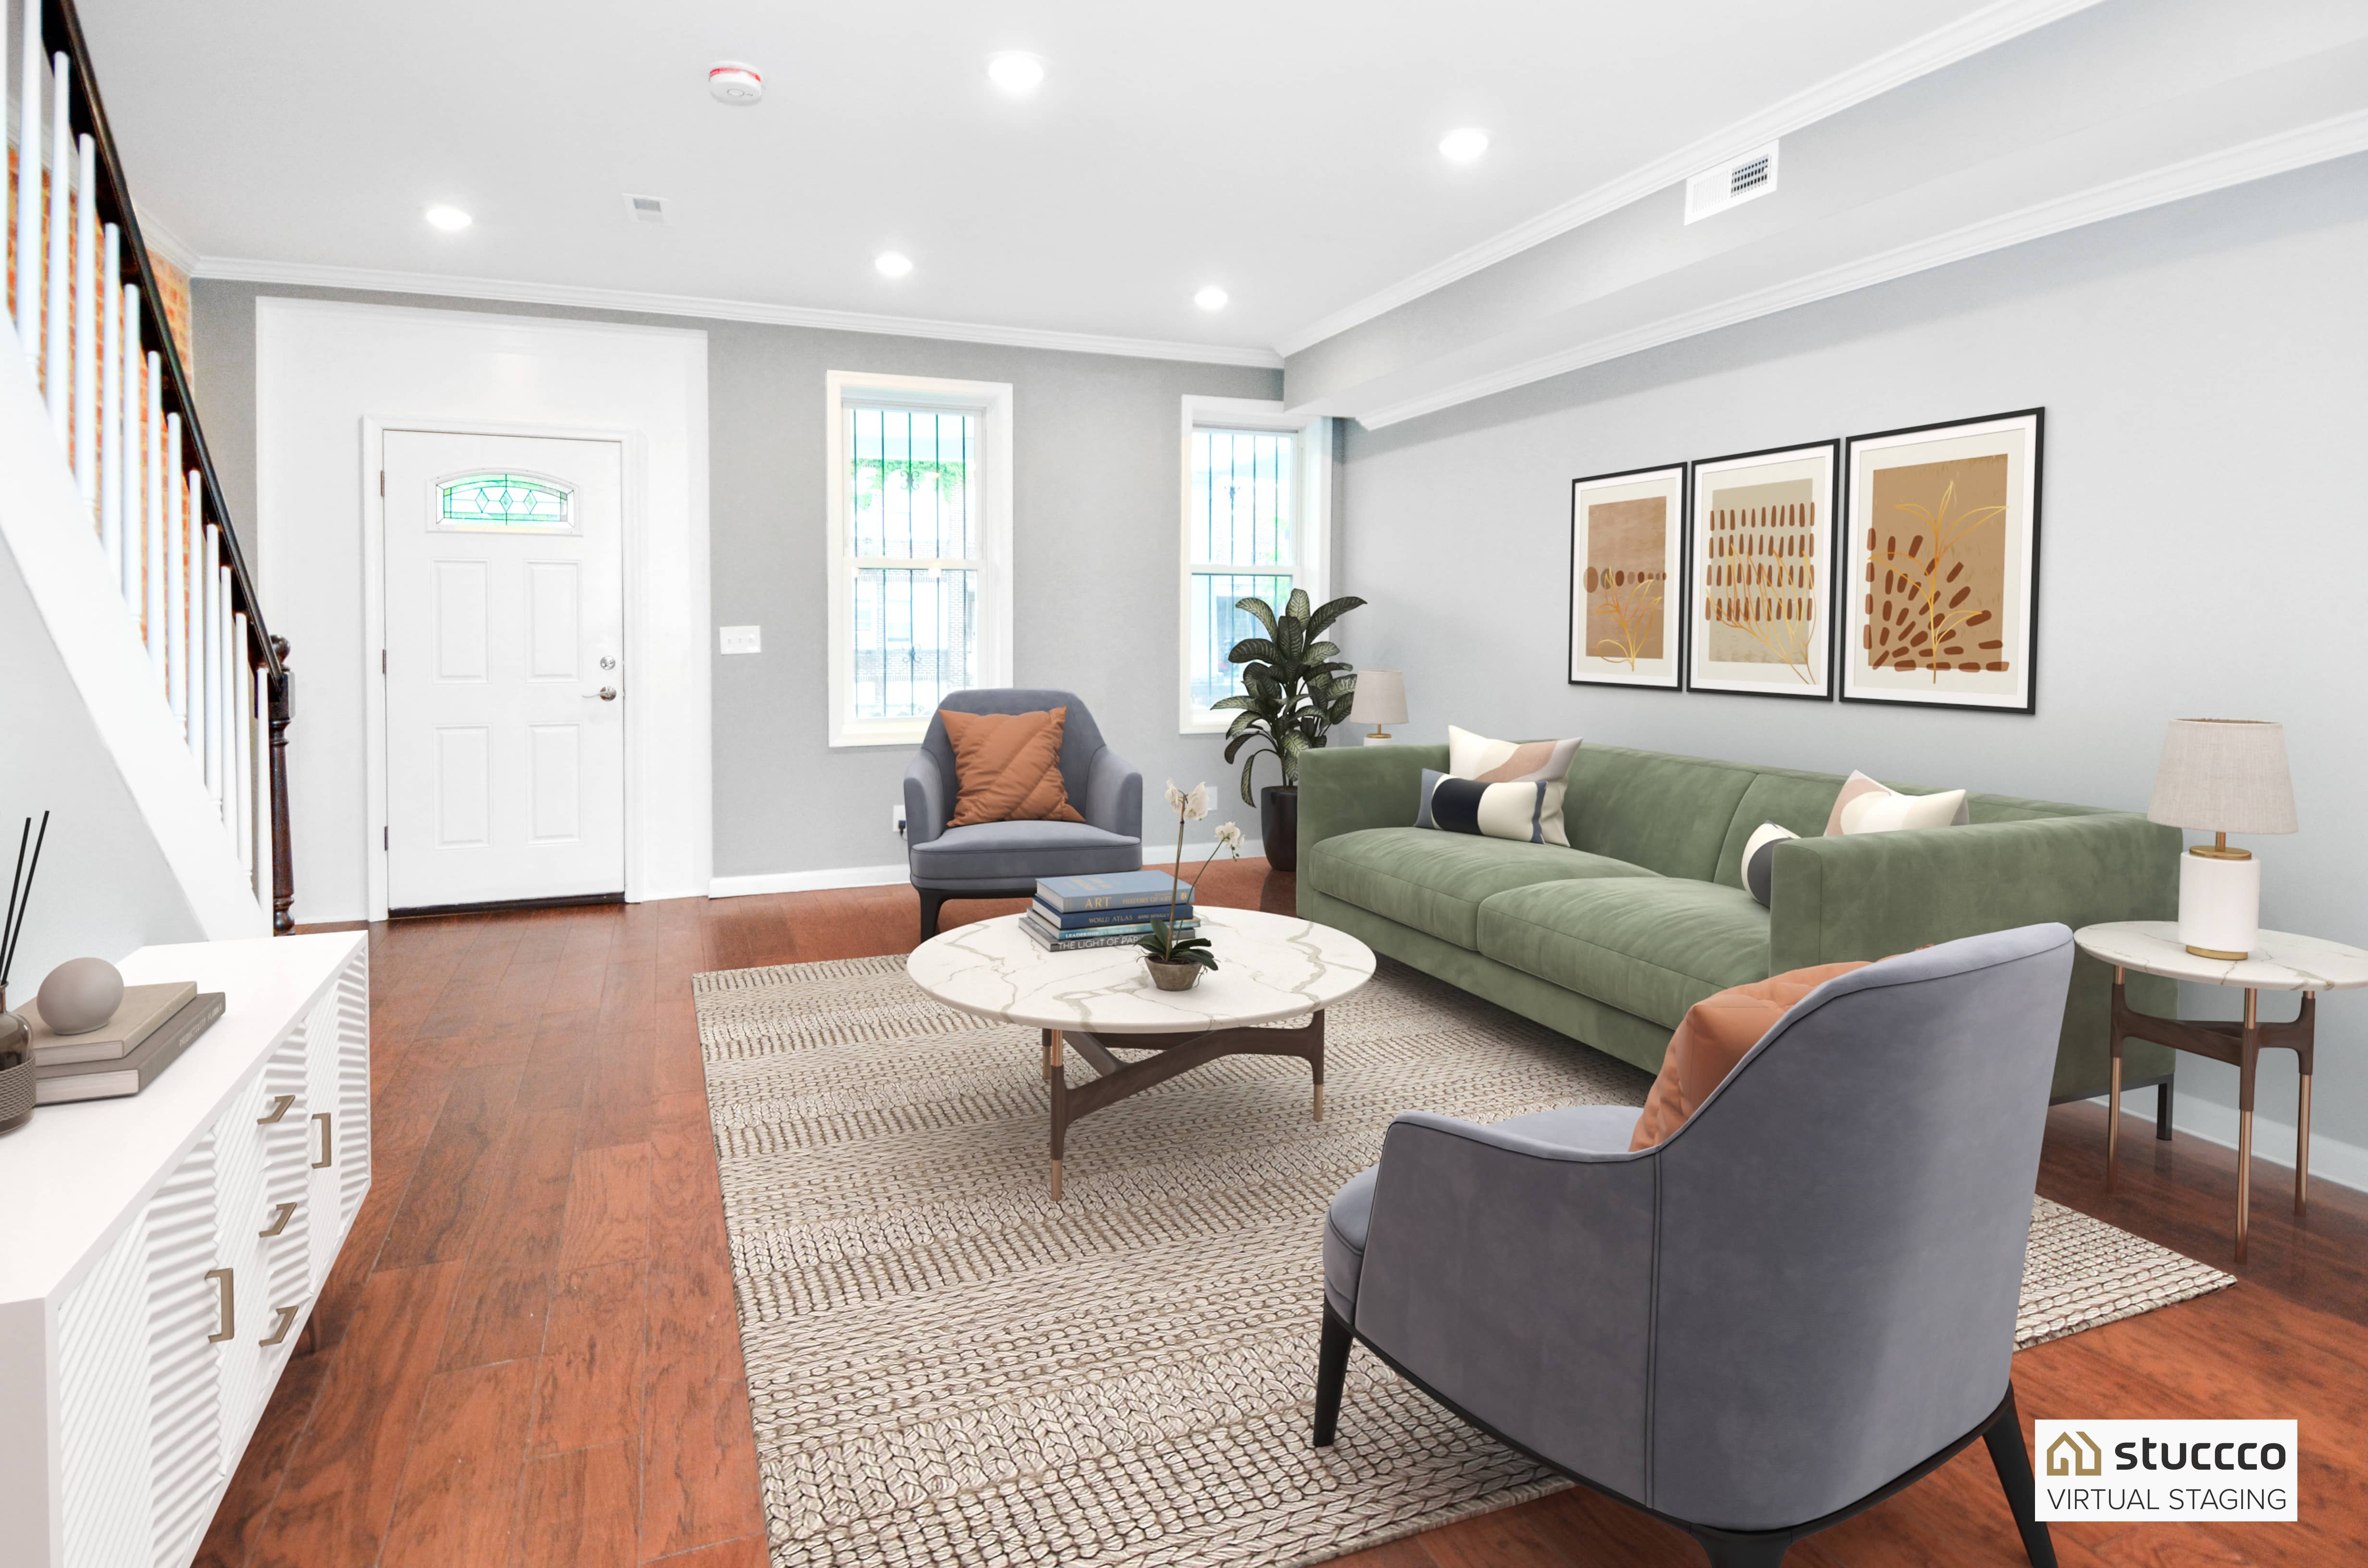 Stuccco virtual staging living room example